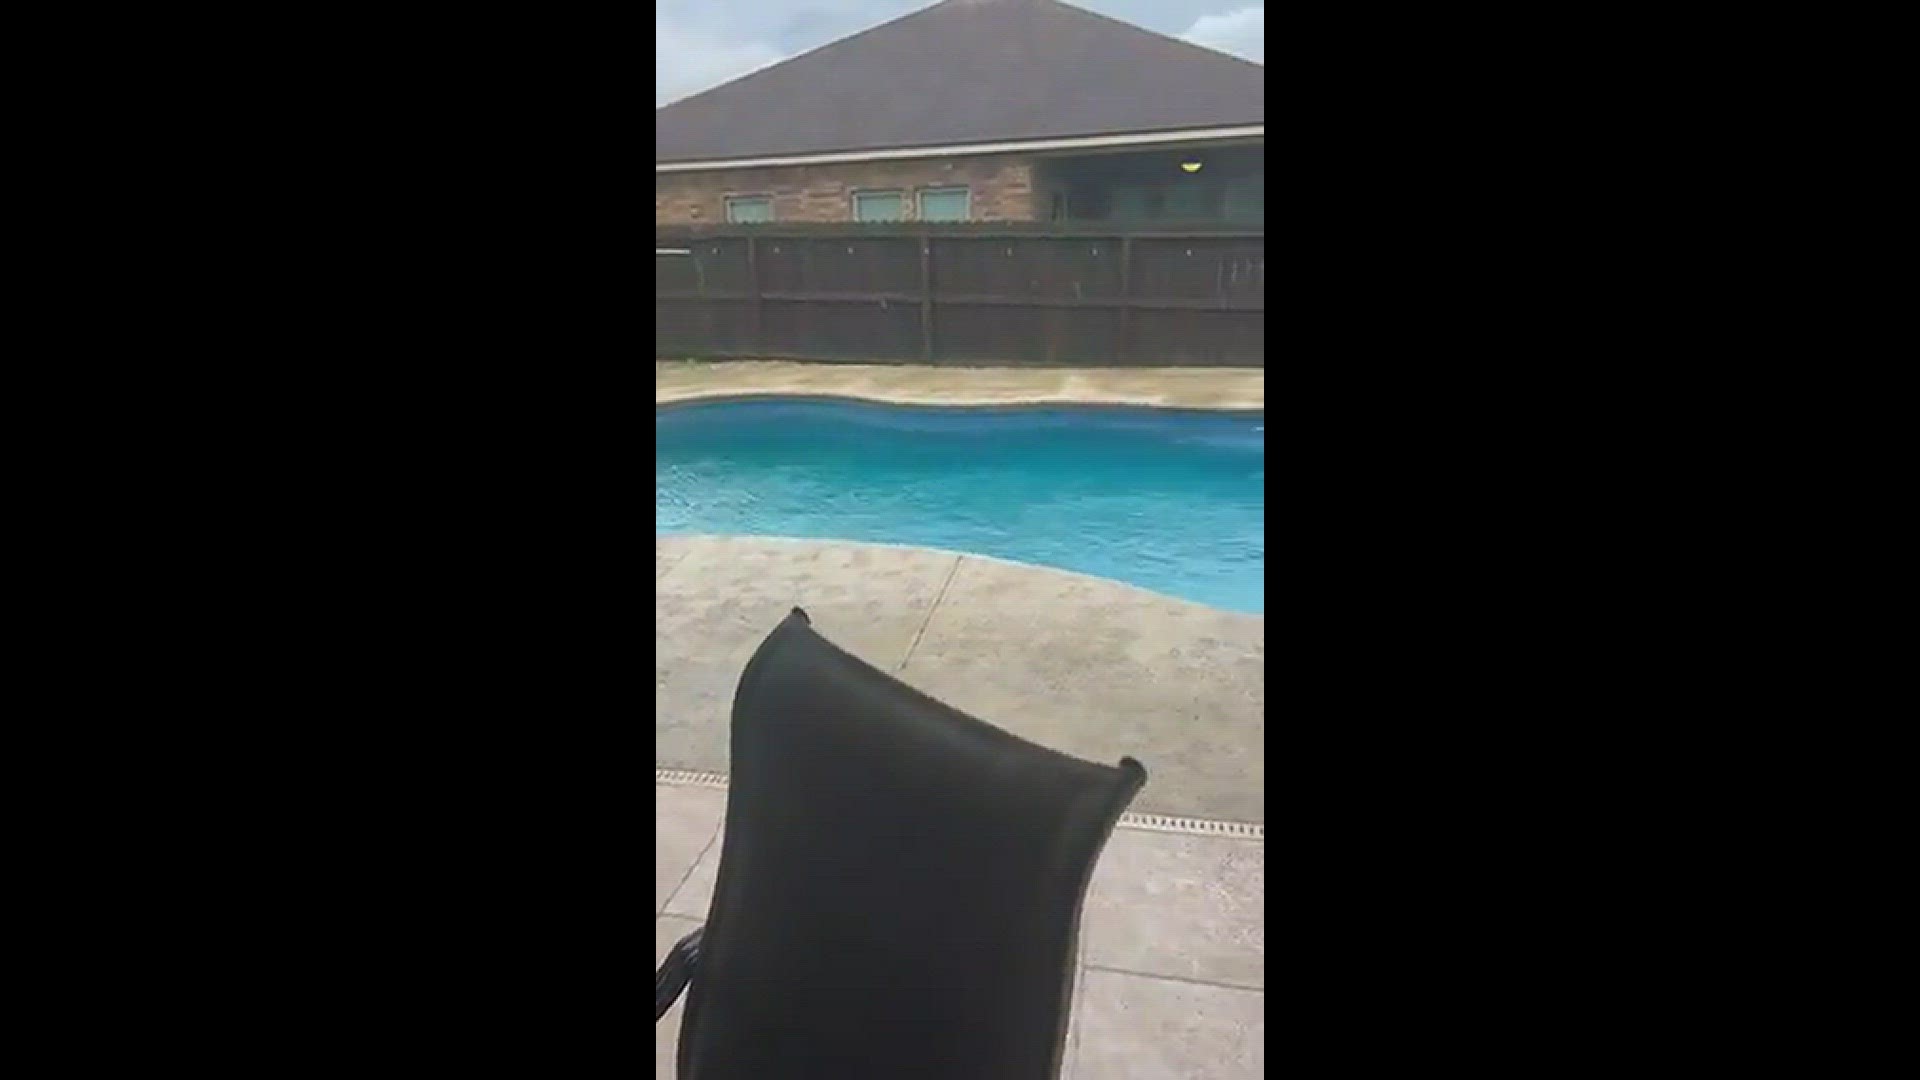 Cindy Lane sent us this video of Sunday's rain from the Annaville area.
Credit: Cindy